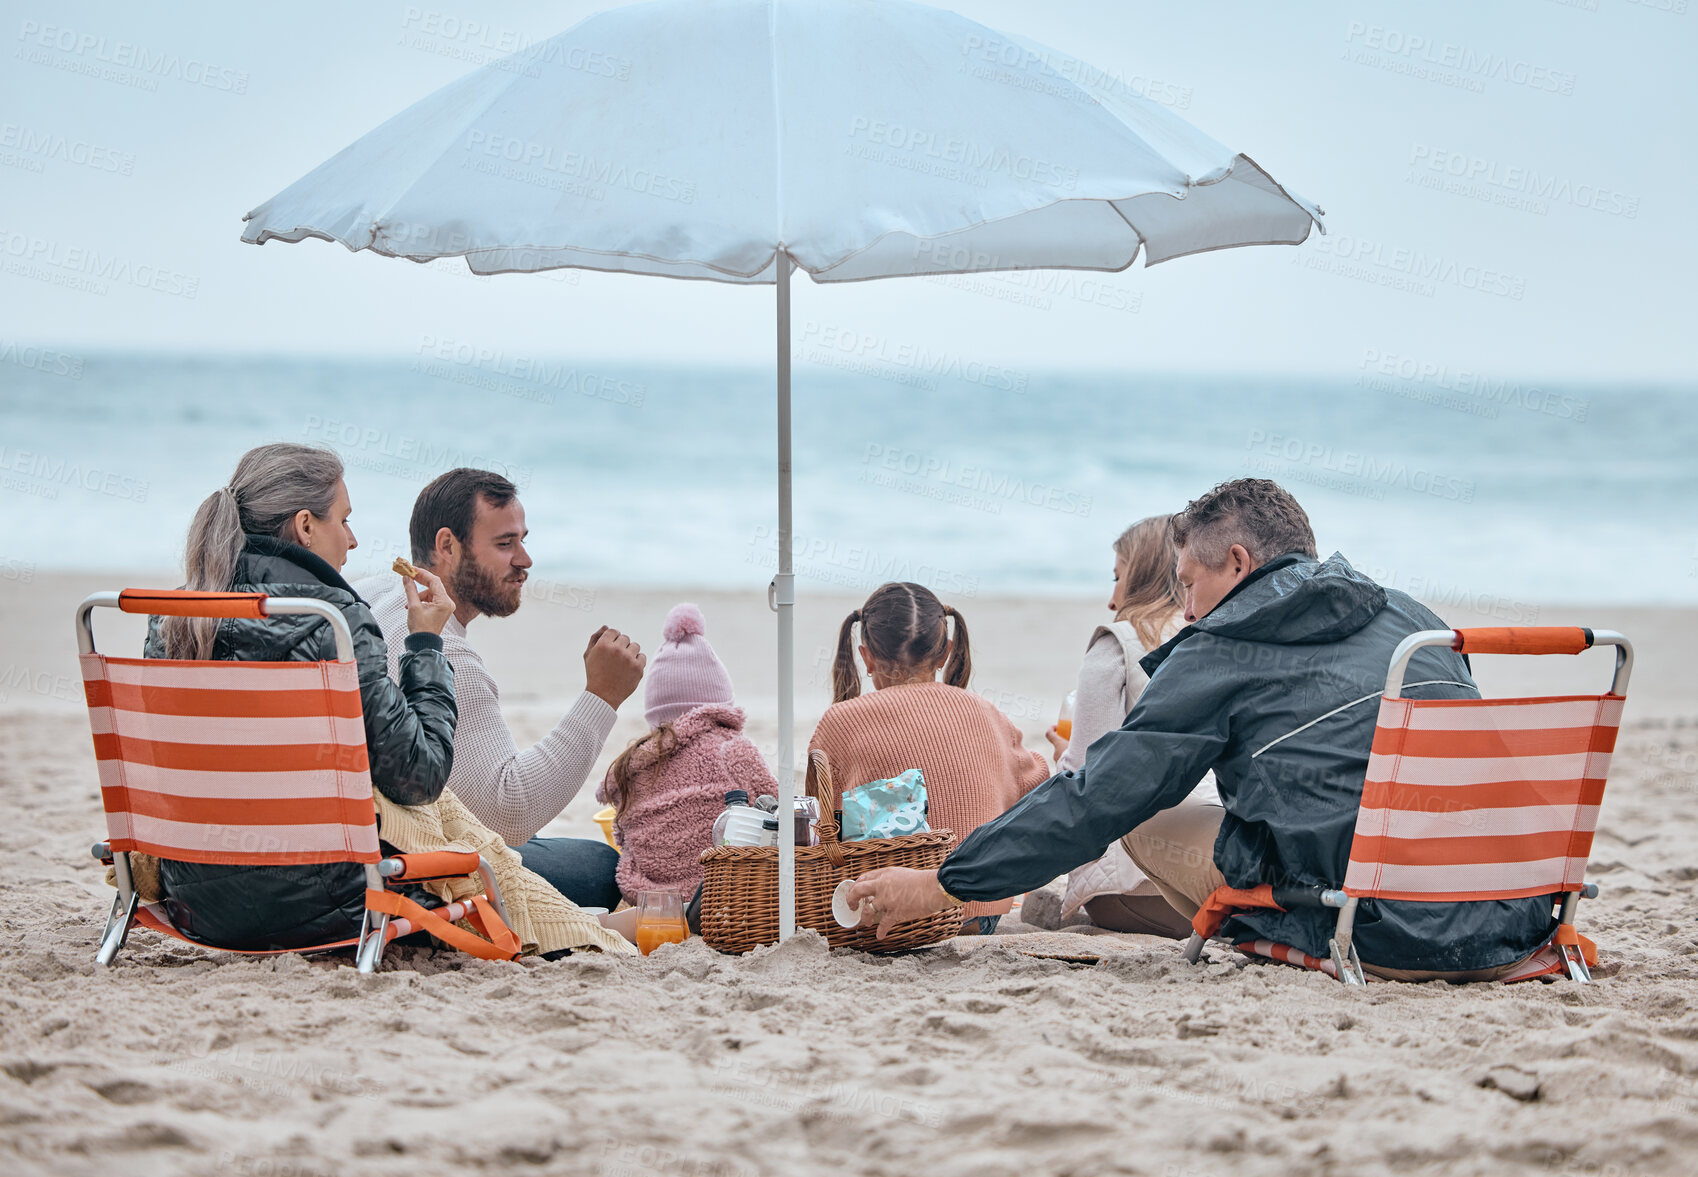 Buy stock photo Family, beach food and relax on holiday, vacation or trip outdoors on sandy seashore. Back view, bonding and grandparents and mom, dad and kids enjoying quality time together under beach umbrella.